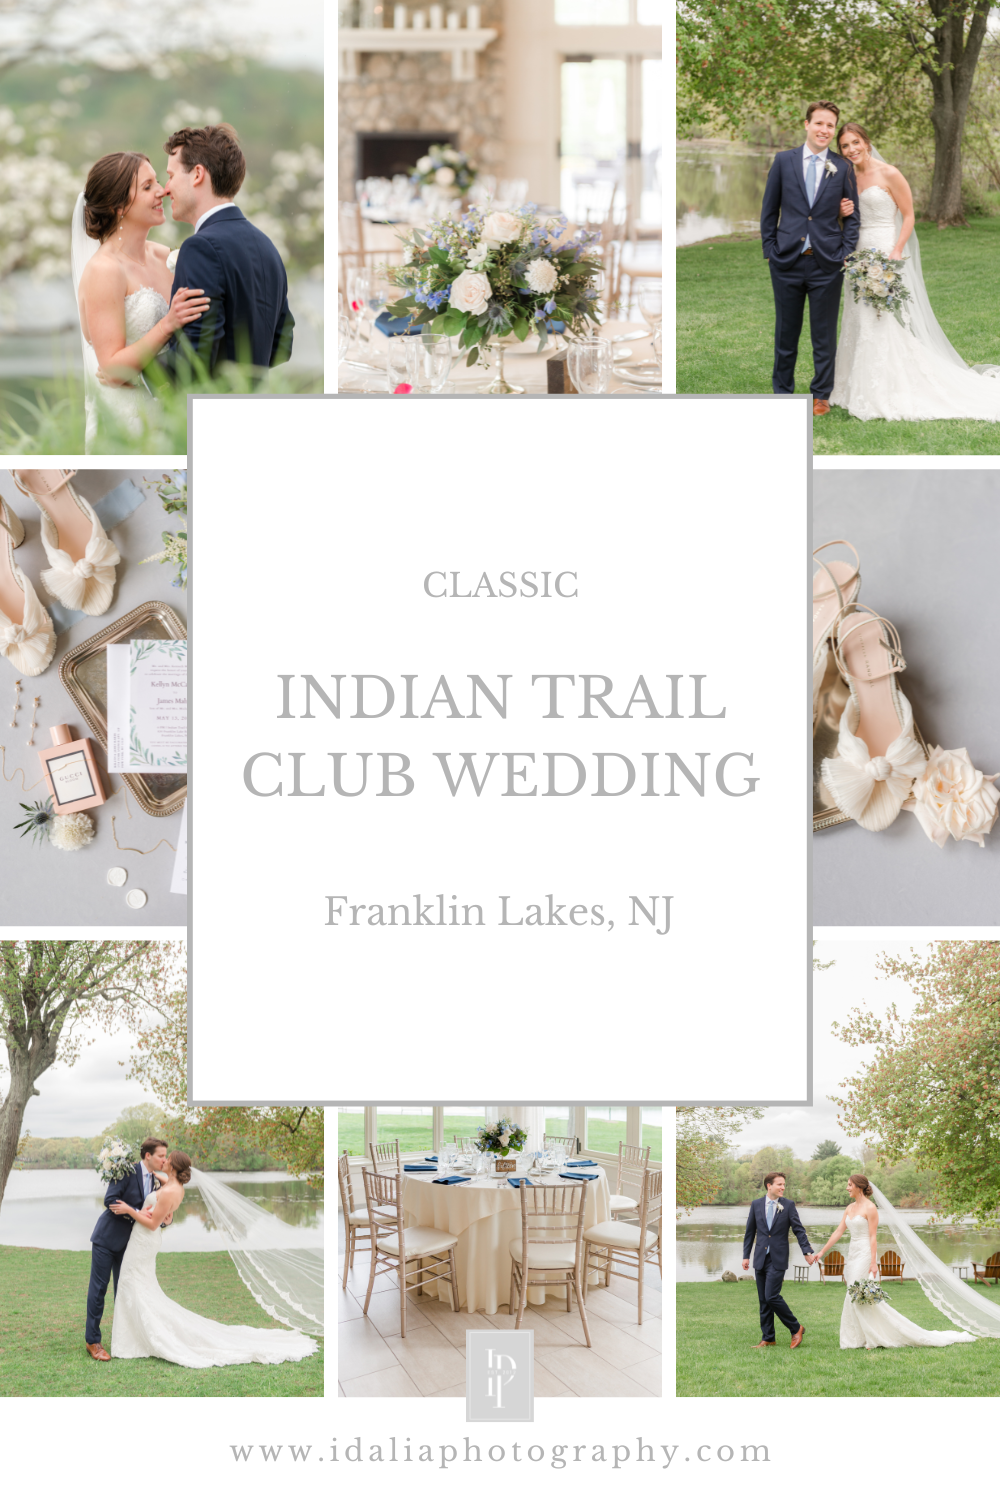 Spring Indian Trail Club wedding celebration with blue and green details photographed by NJ wedding photographer Idalia Photography